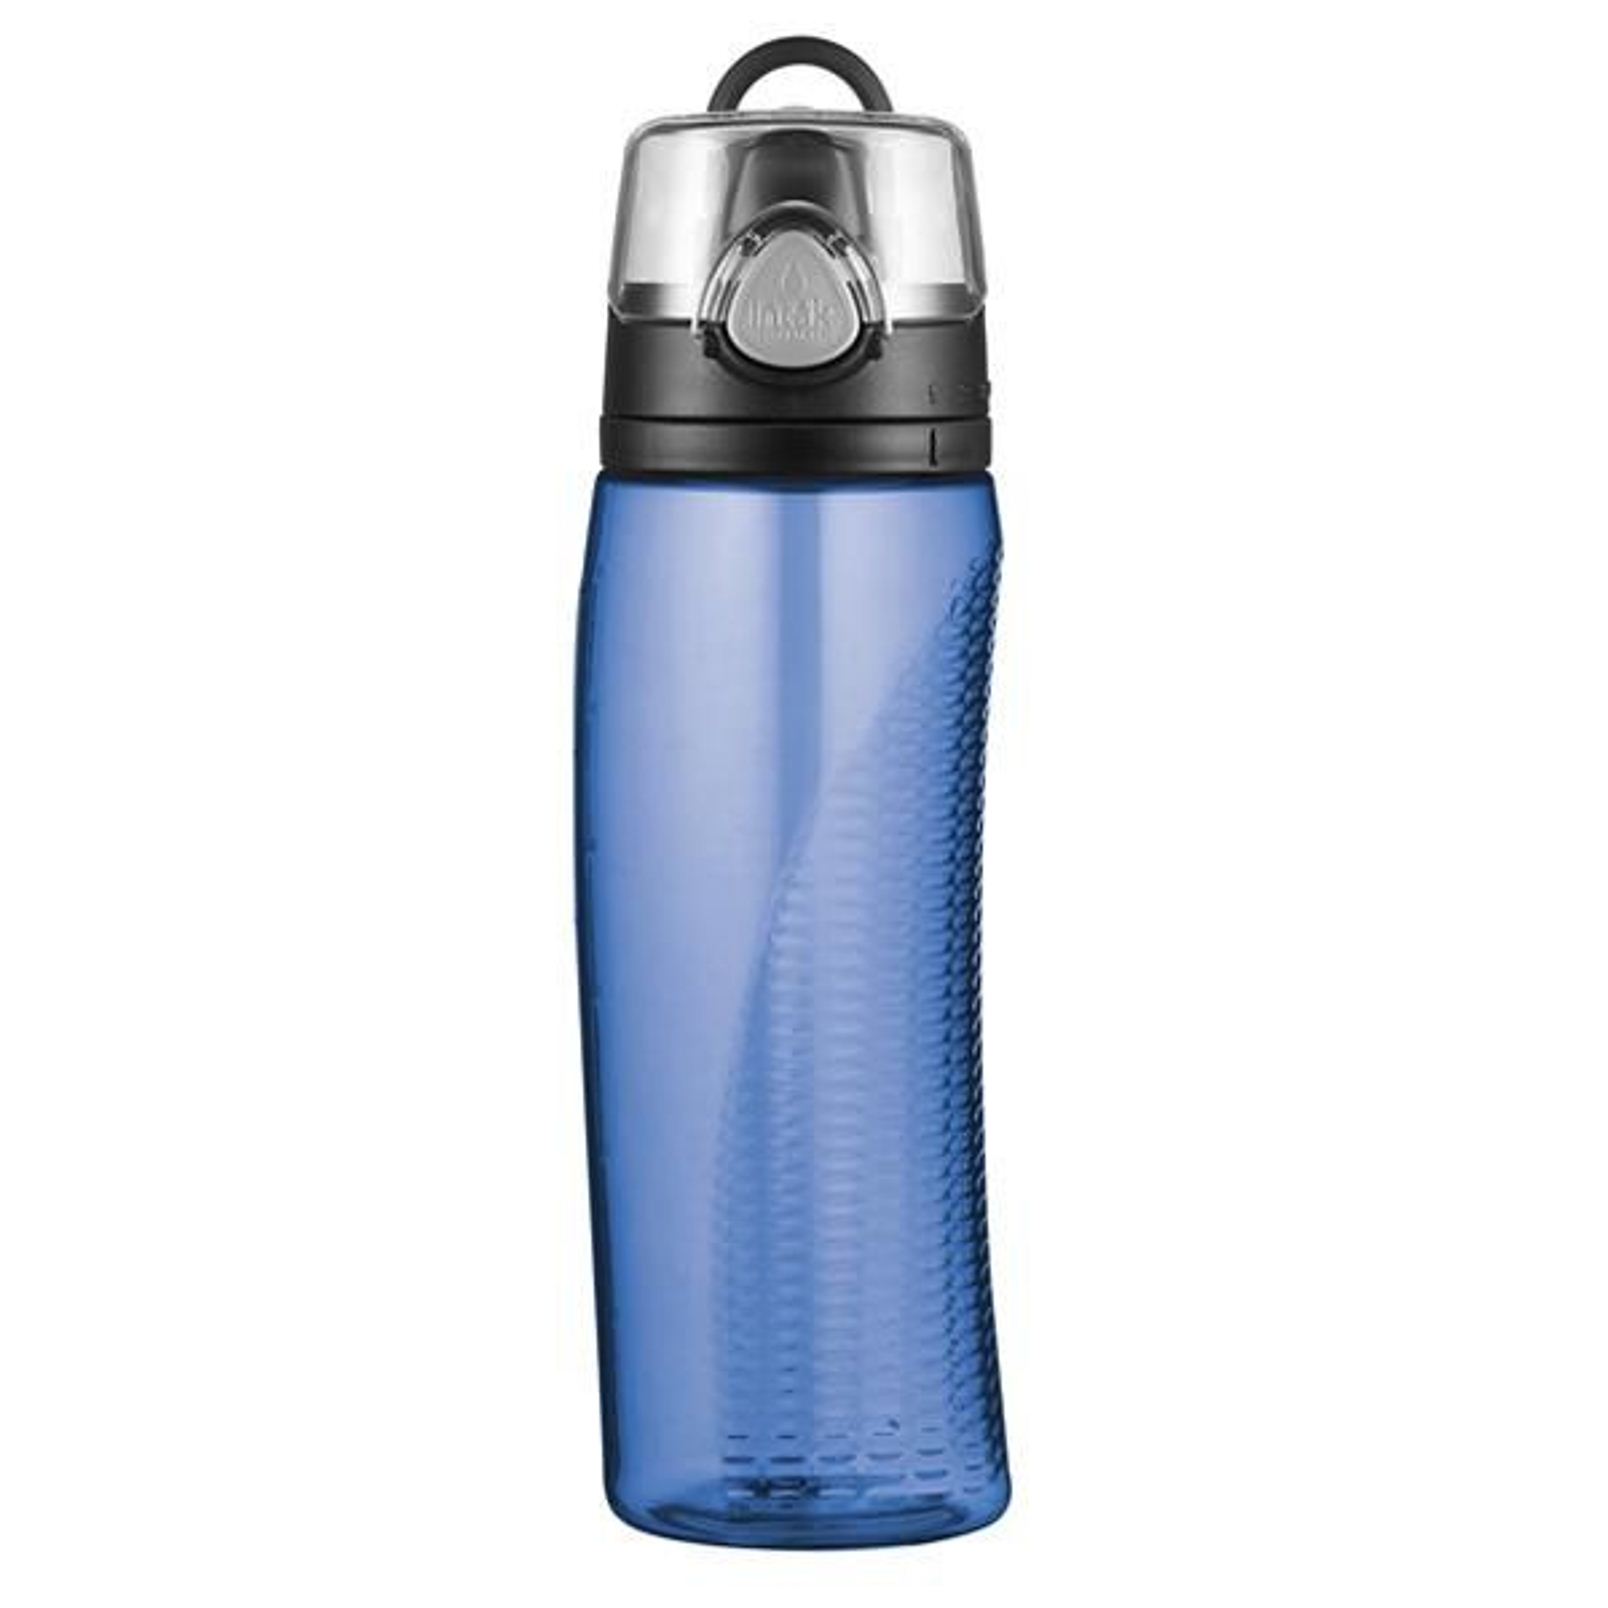 Thermos Water Bottles \u0026 Carriers - Kmart